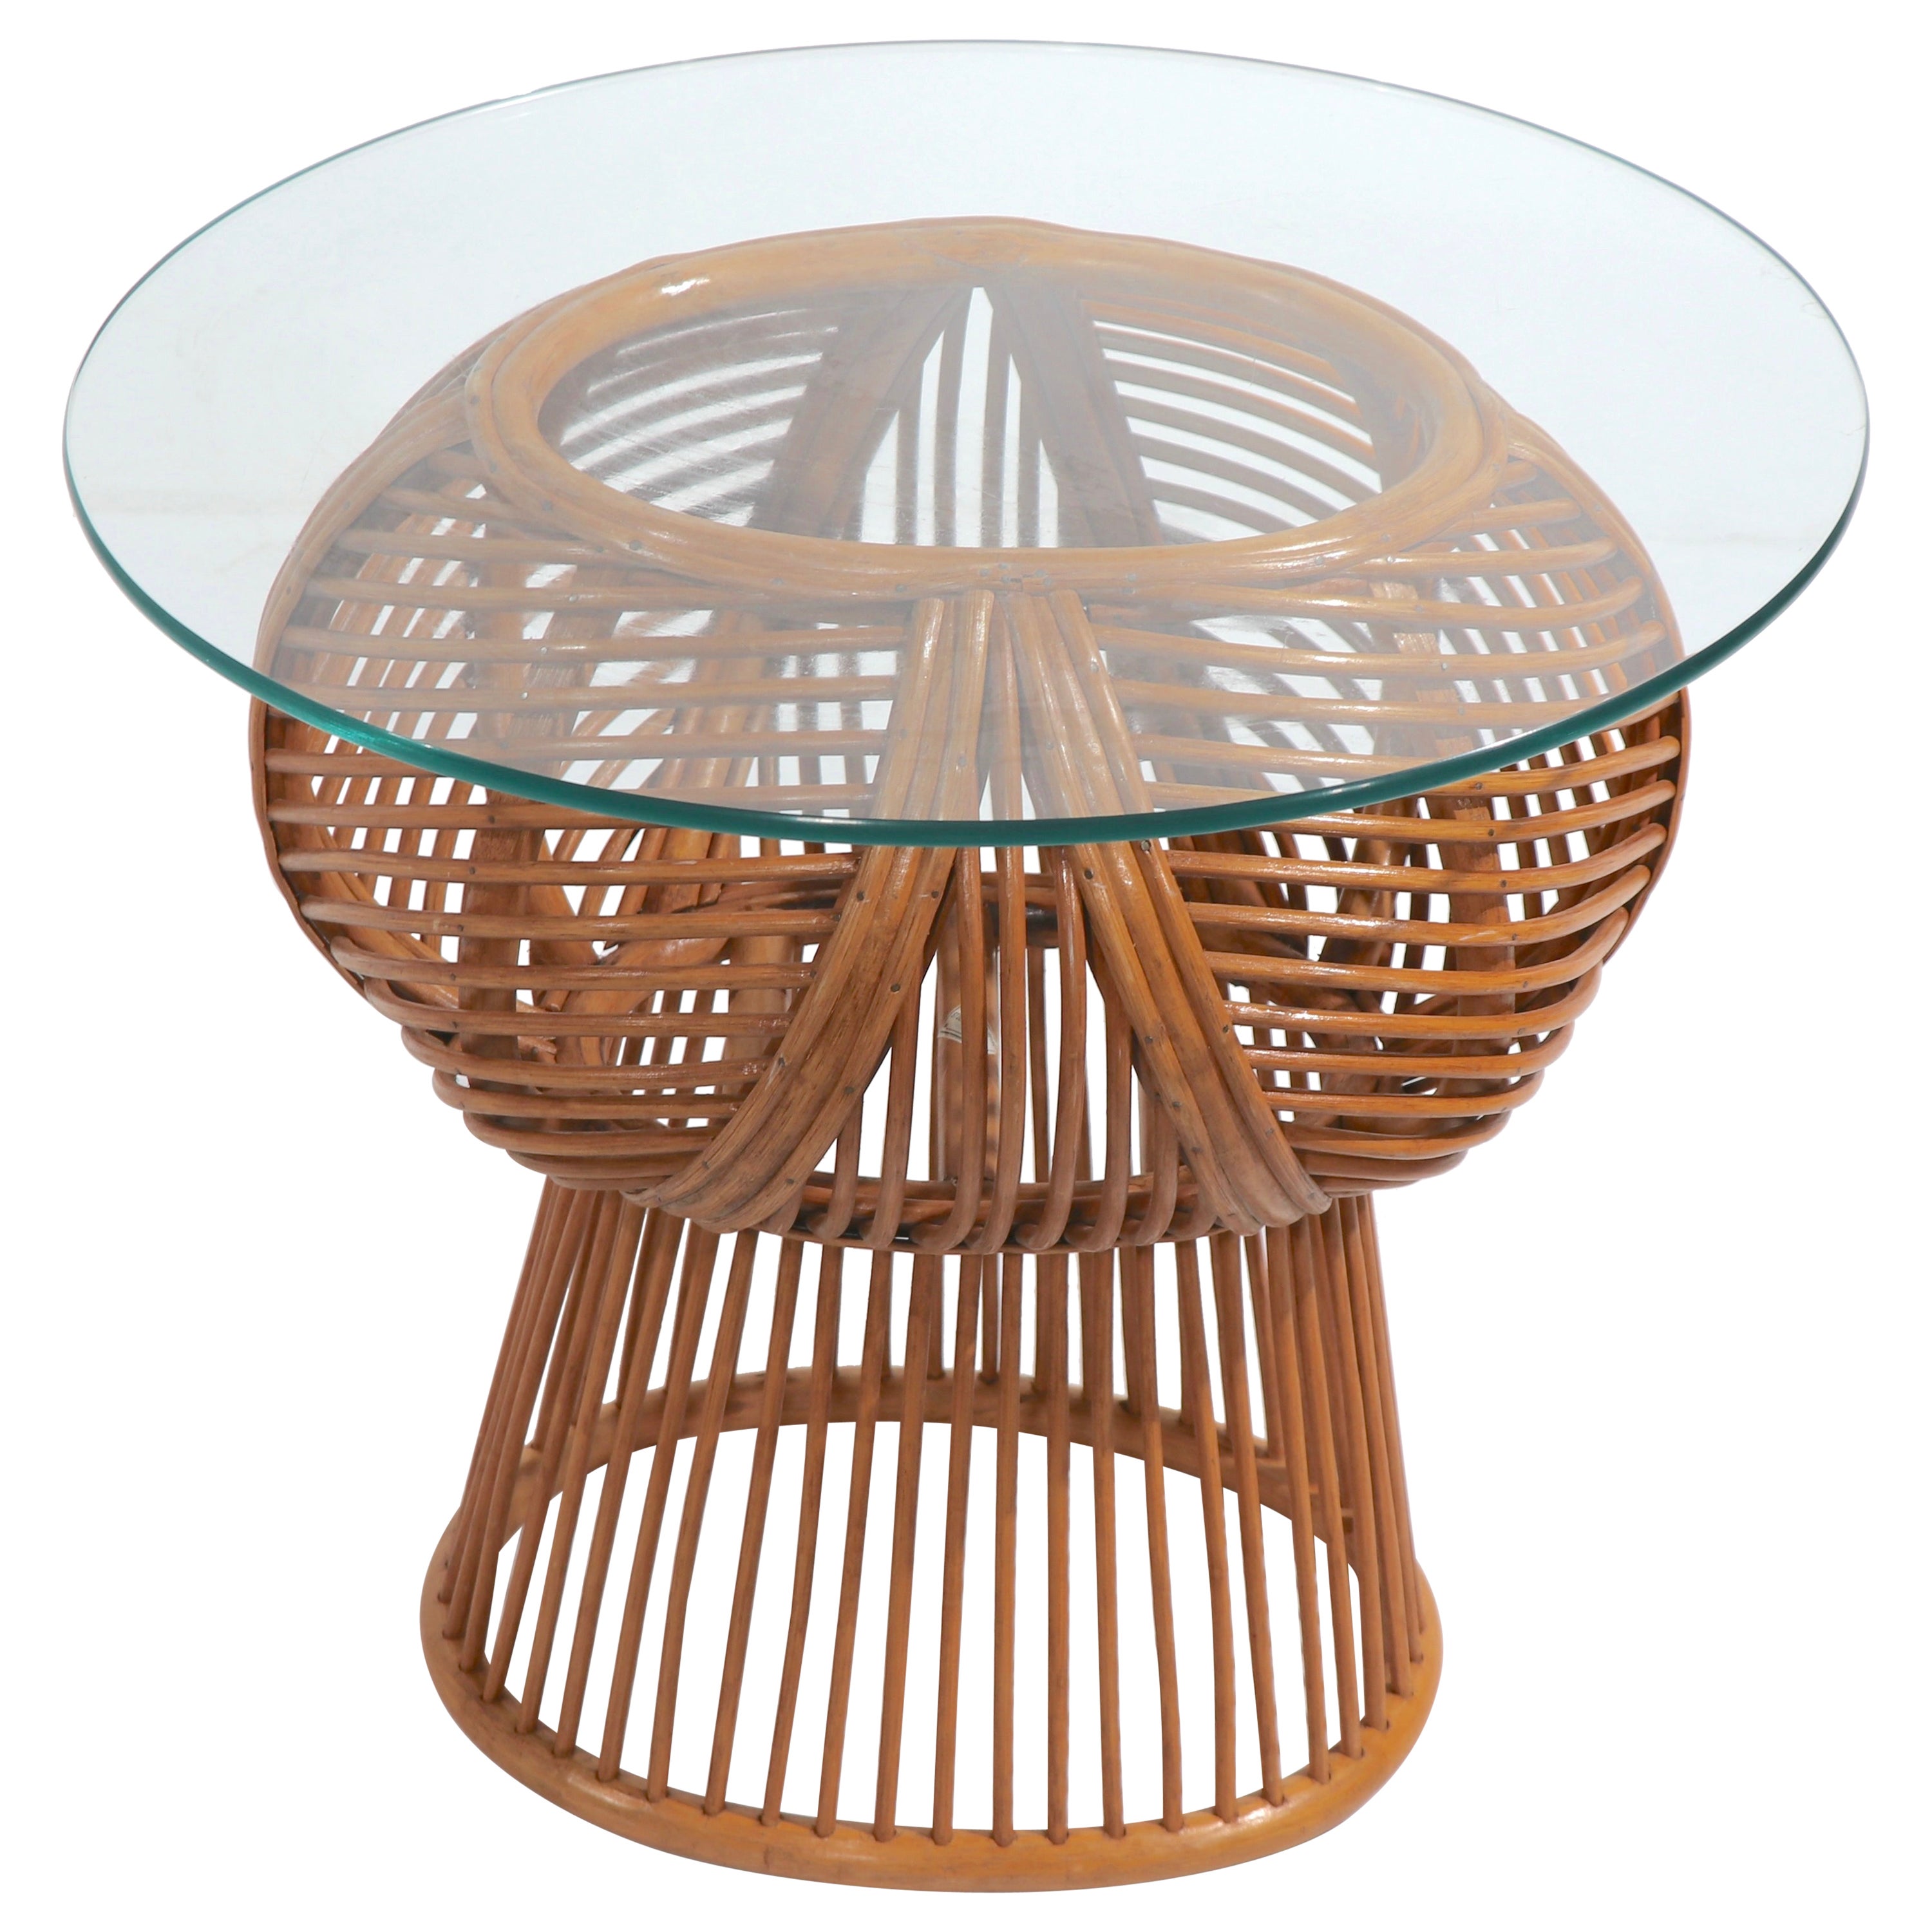 Wicker and Glass End, Side Table after Parzinger, Olko